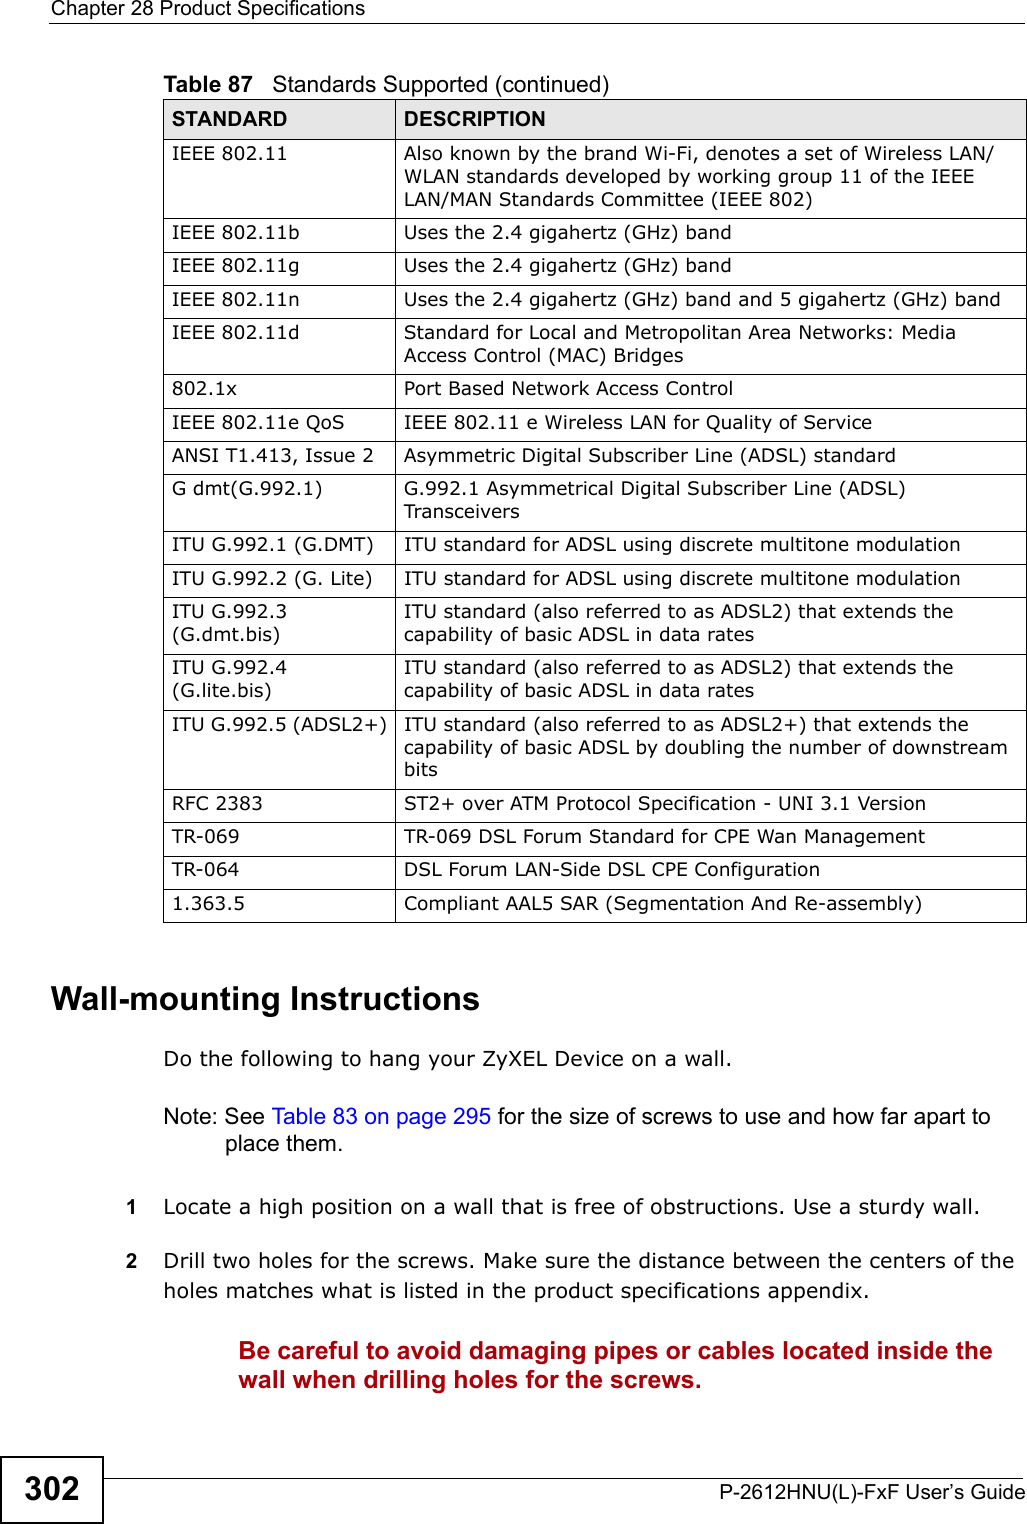 Chapter 28 Product SpecificationsP-2612HNU(L)-FxF User’s Guide302Wall-mounting InstructionsDo the following to hang your ZyXEL Device on a wall.Note: See Table 83 on page 295 for the size of screws to use and how far apart to place them.1Locate a high position on a wall that is free of obstructions. Use a sturdy wall.2Drill two holes for the screws. Make sure the distance between the centers of the holes matches what is listed in the product specifications appendix.Be careful to avoid damaging pipes or cables located inside the wall when drilling holes for the screws.IEEE 802.11 Also known by the brand Wi-Fi, denotes a set of Wireless LAN/WLAN standards developed by working group 11 of the IEEE LAN/MAN Standards Committee (IEEE 802)IEEE 802.11b Uses the 2.4 gigahertz (GHz) bandIEEE 802.11g Uses the 2.4 gigahertz (GHz) bandIEEE 802.11n Uses the 2.4 gigahertz (GHz) band and 5 gigahertz (GHz) bandIEEE 802.11d Standard for Local and Metropolitan Area Networks: Media Access Control (MAC) Bridges802.1x Port Based Network Access ControlIEEE 802.11e QoS IEEE 802.11 e Wireless LAN for Quality of ServiceANSI T1.413, Issue 2 Asymmetric Digital Subscriber Line (ADSL) standardG dmt(G.992.1) G.992.1 Asymmetrical Digital Subscriber Line (ADSL)TransceiversITU G.992.1 (G.DMT) ITU standard for ADSL using discrete multitone modulationITU G.992.2 (G. Lite) ITU standard for ADSL using discrete multitone modulationITU G.992.3 (G.dmt.bis)ITU standard (also referred to as ADSL2) that extends the capability of basic ADSL in data ratesITU G.992.4 (G.lite.bis)ITU standard (also referred to as ADSL2) that extends the capability of basic ADSL in data ratesITU G.992.5 (ADSL2+) ITU standard (also referred to as ADSL2+) that extends the capability of basic ADSL by doubling the number of downstream bitsRFC 2383 ST2+ over ATM Protocol Specification - UNI 3.1 VersionTR-069 TR-069 DSL Forum Standard for CPE Wan ManagementTR-064 DSL Forum LAN-Side DSL CPE Configuration1.363.5 Compliant AAL5 SAR (Segmentation And Re-assembly) Table 87   Standards Supported (continued)STANDARD DESCRIPTION